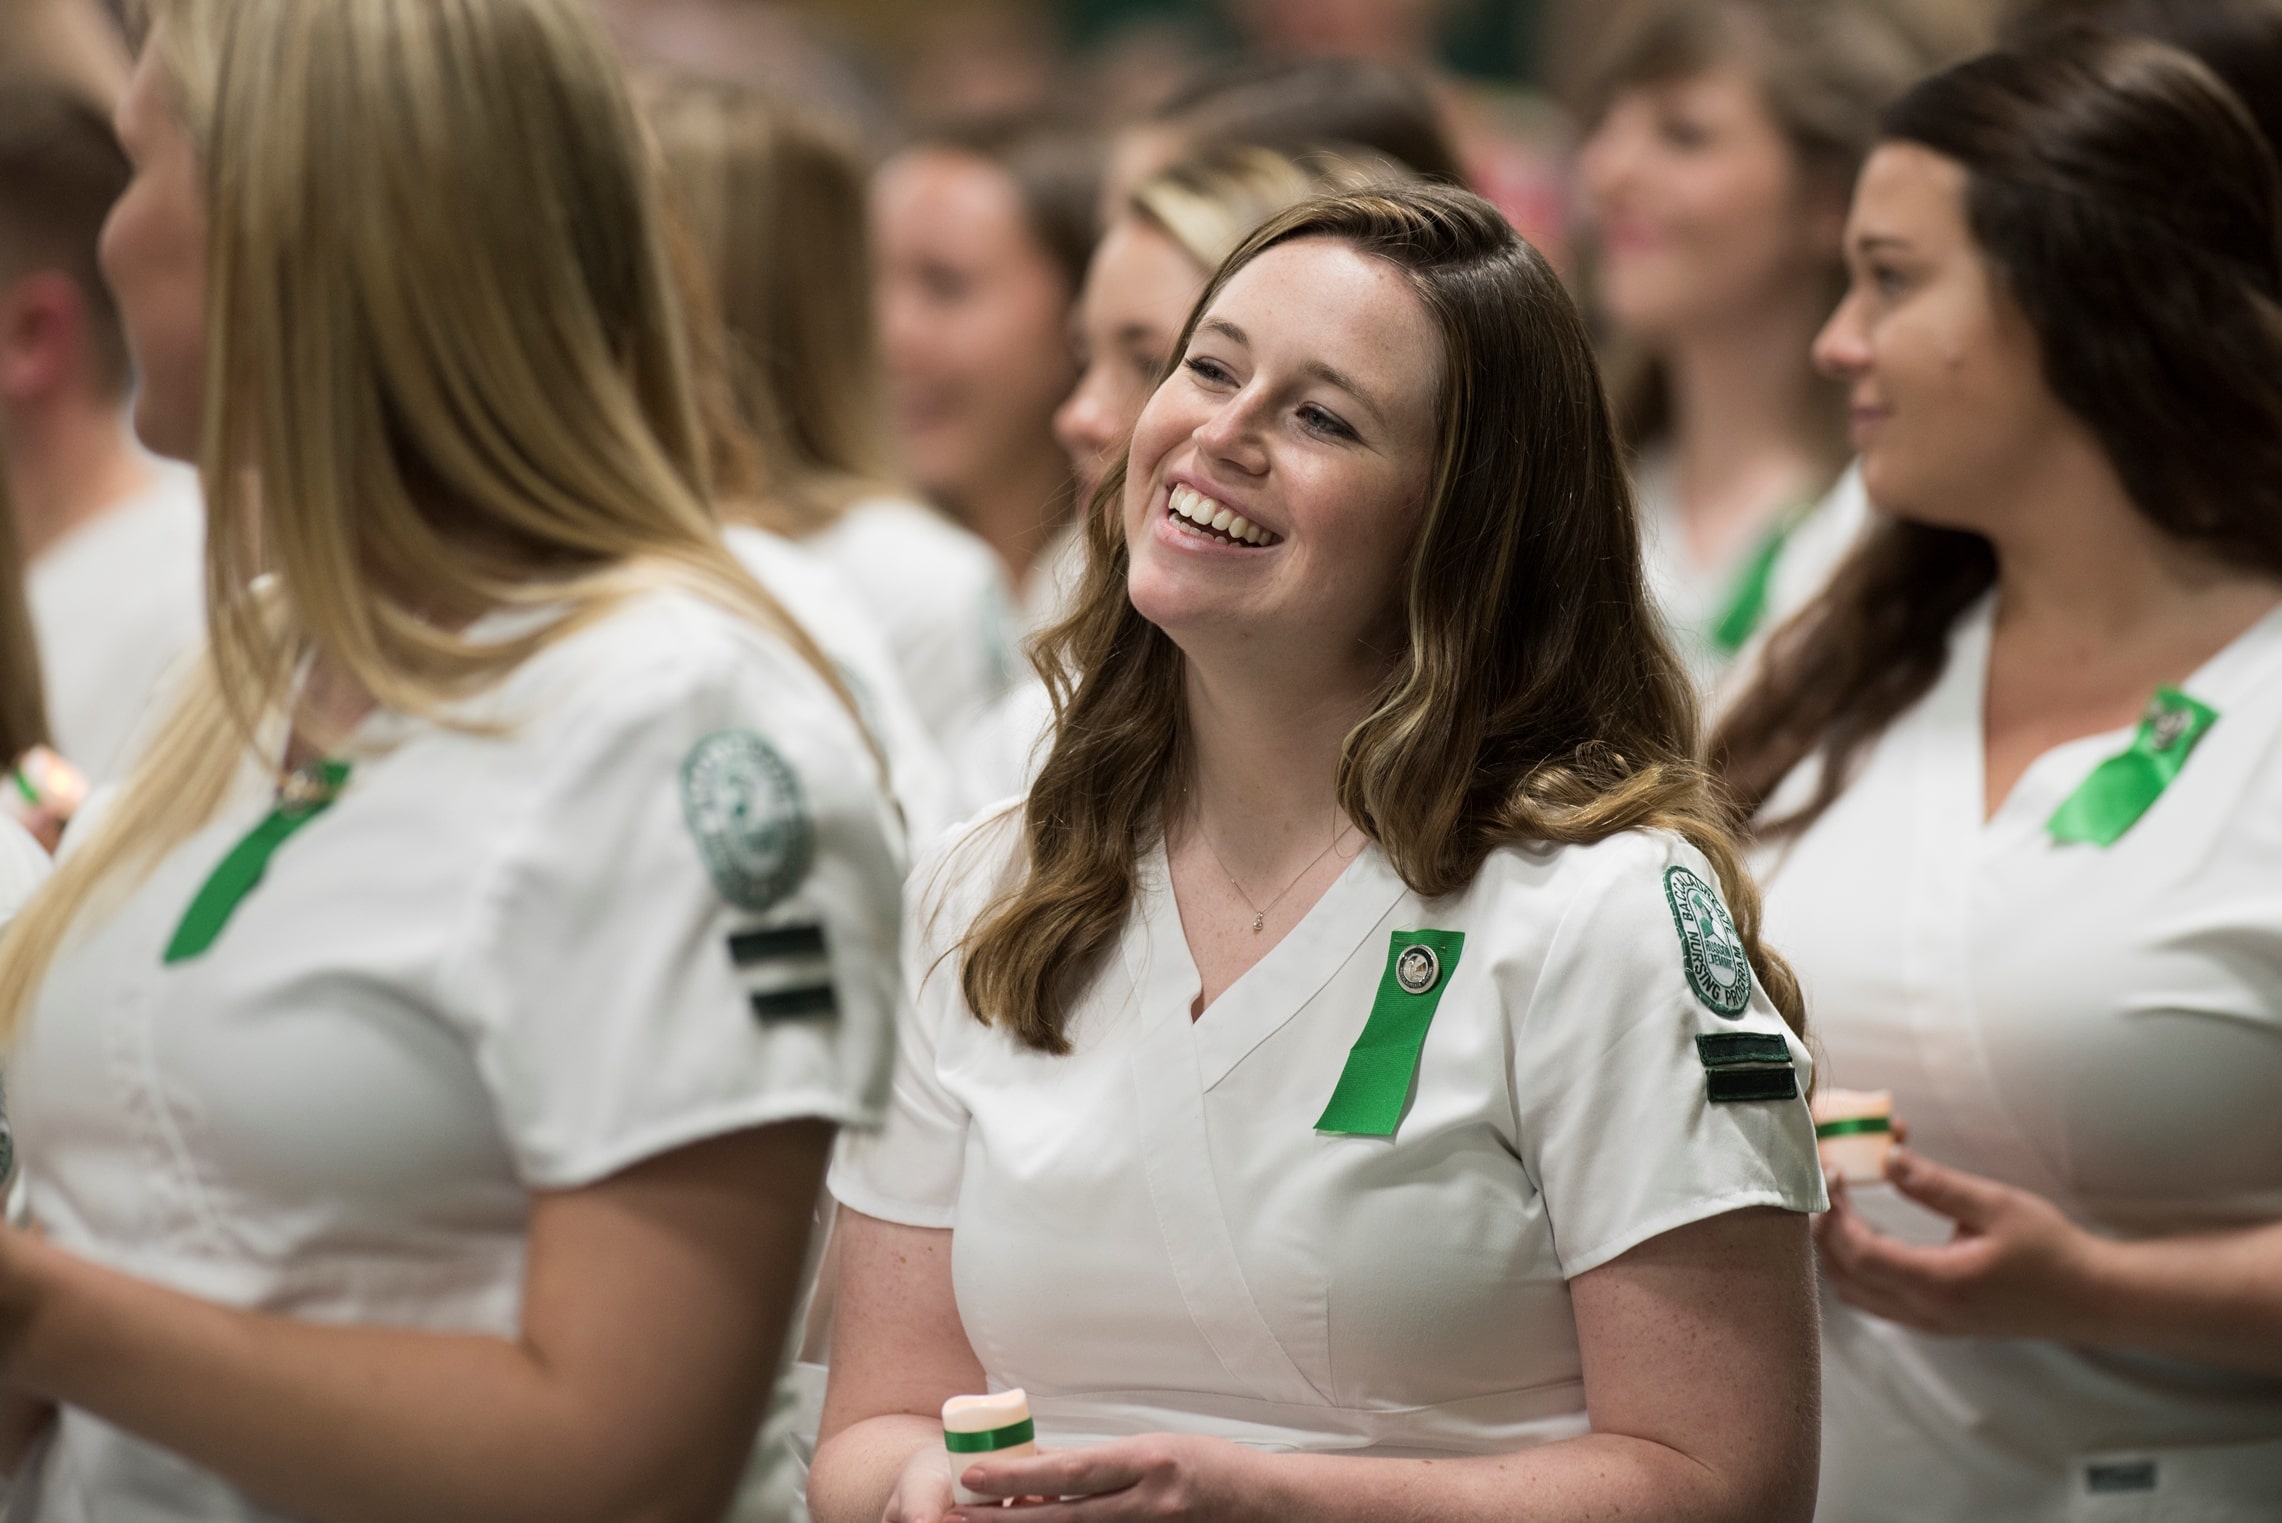 Nurses smiling after receiving their pins during the School of Nursing pinning ceremony.